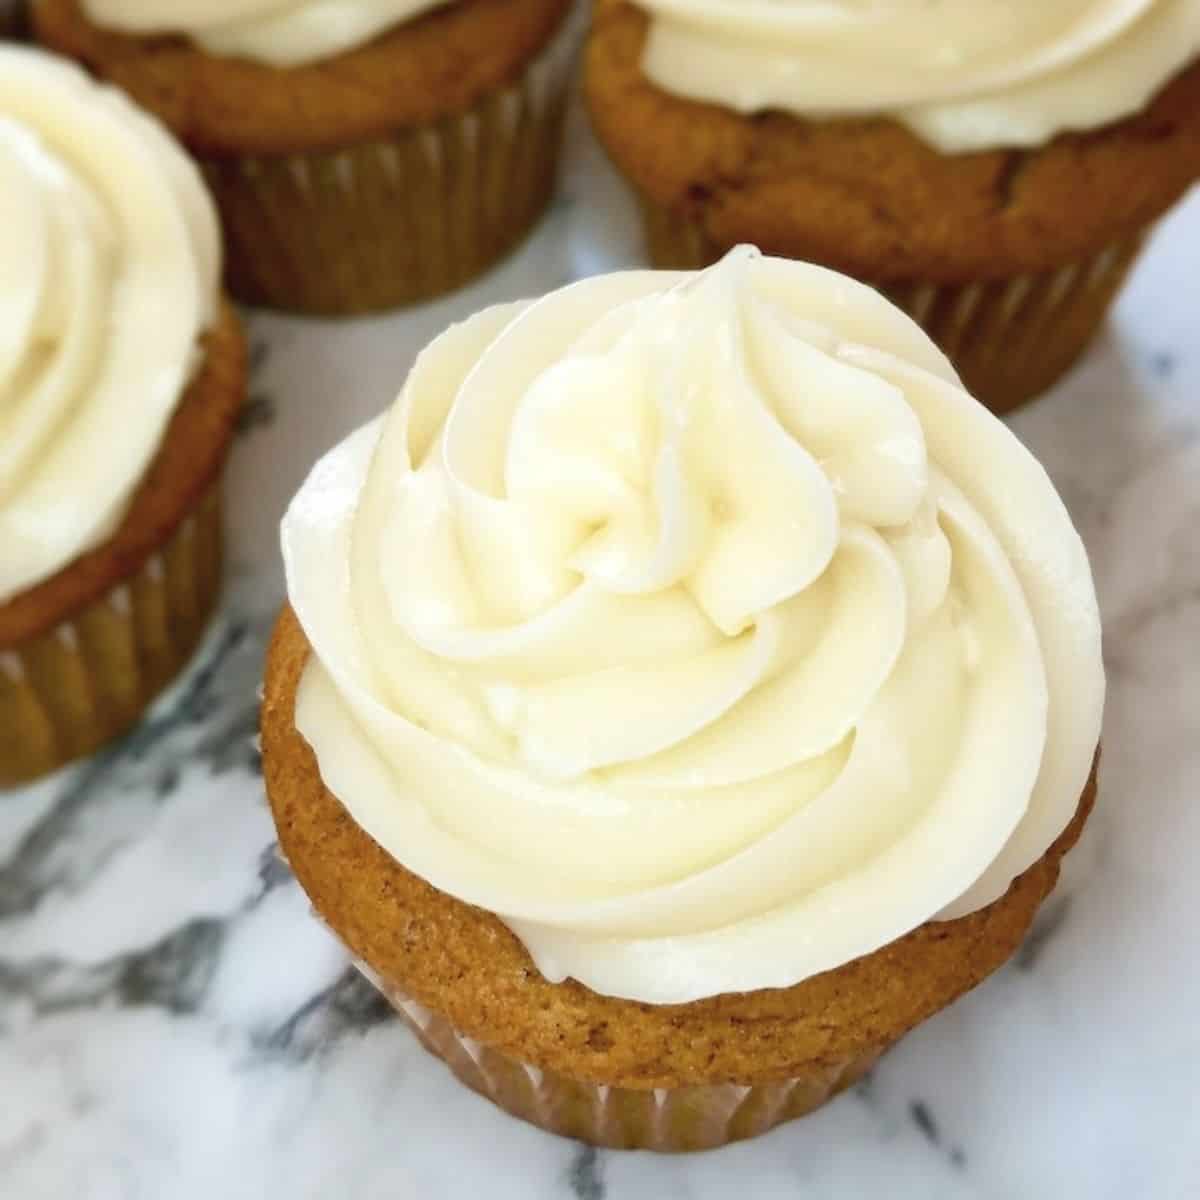 Pumpkin Cupcakes with Maple Cream Cheese Frosting